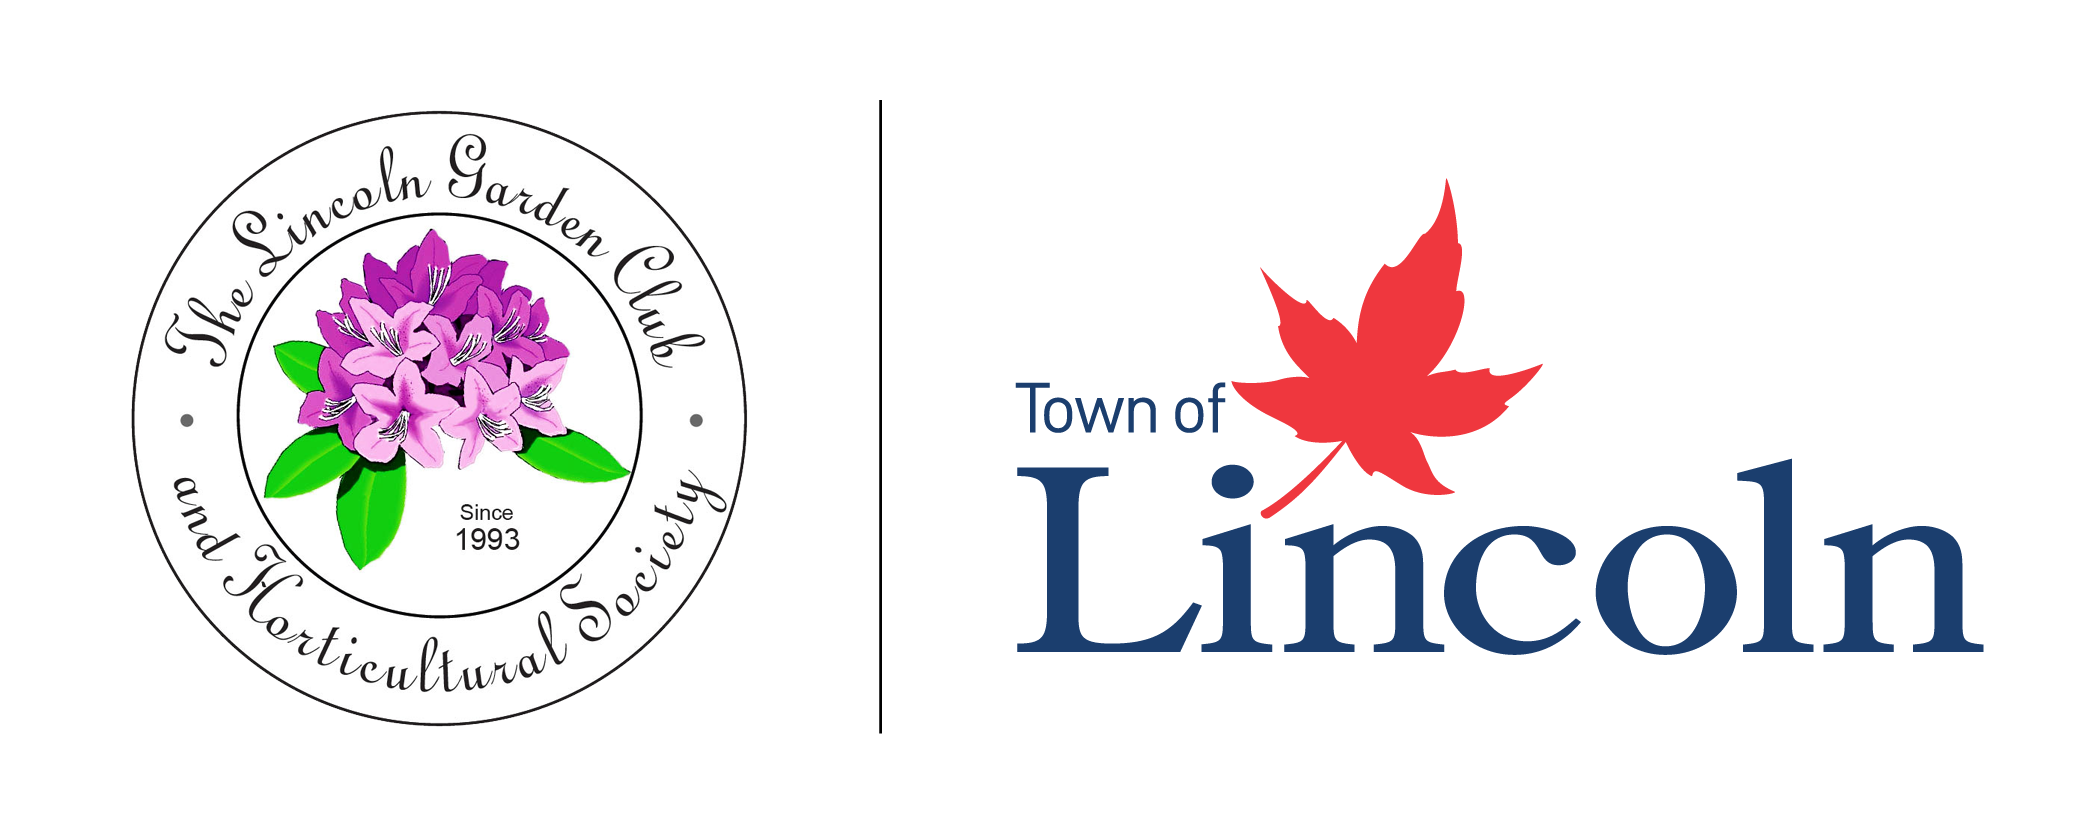 Lincoln Garden Club and Town of Lincoln logos